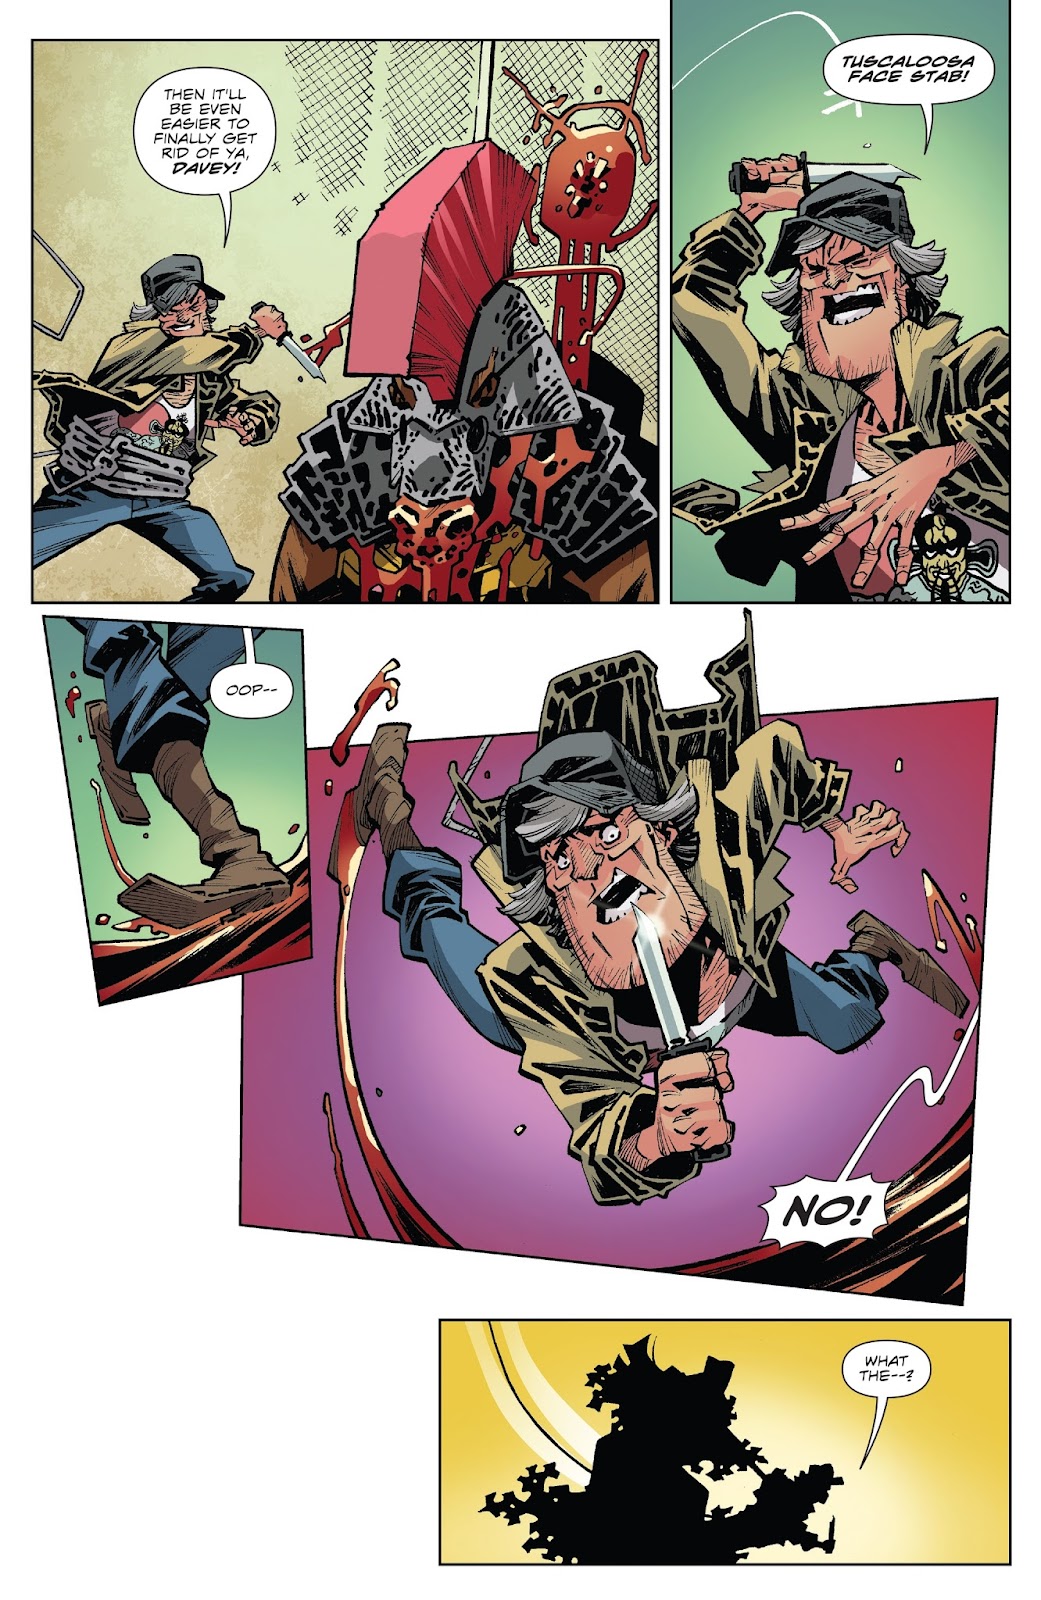 Big Trouble in Little China: Old Man Jack issue 2 - Page 4